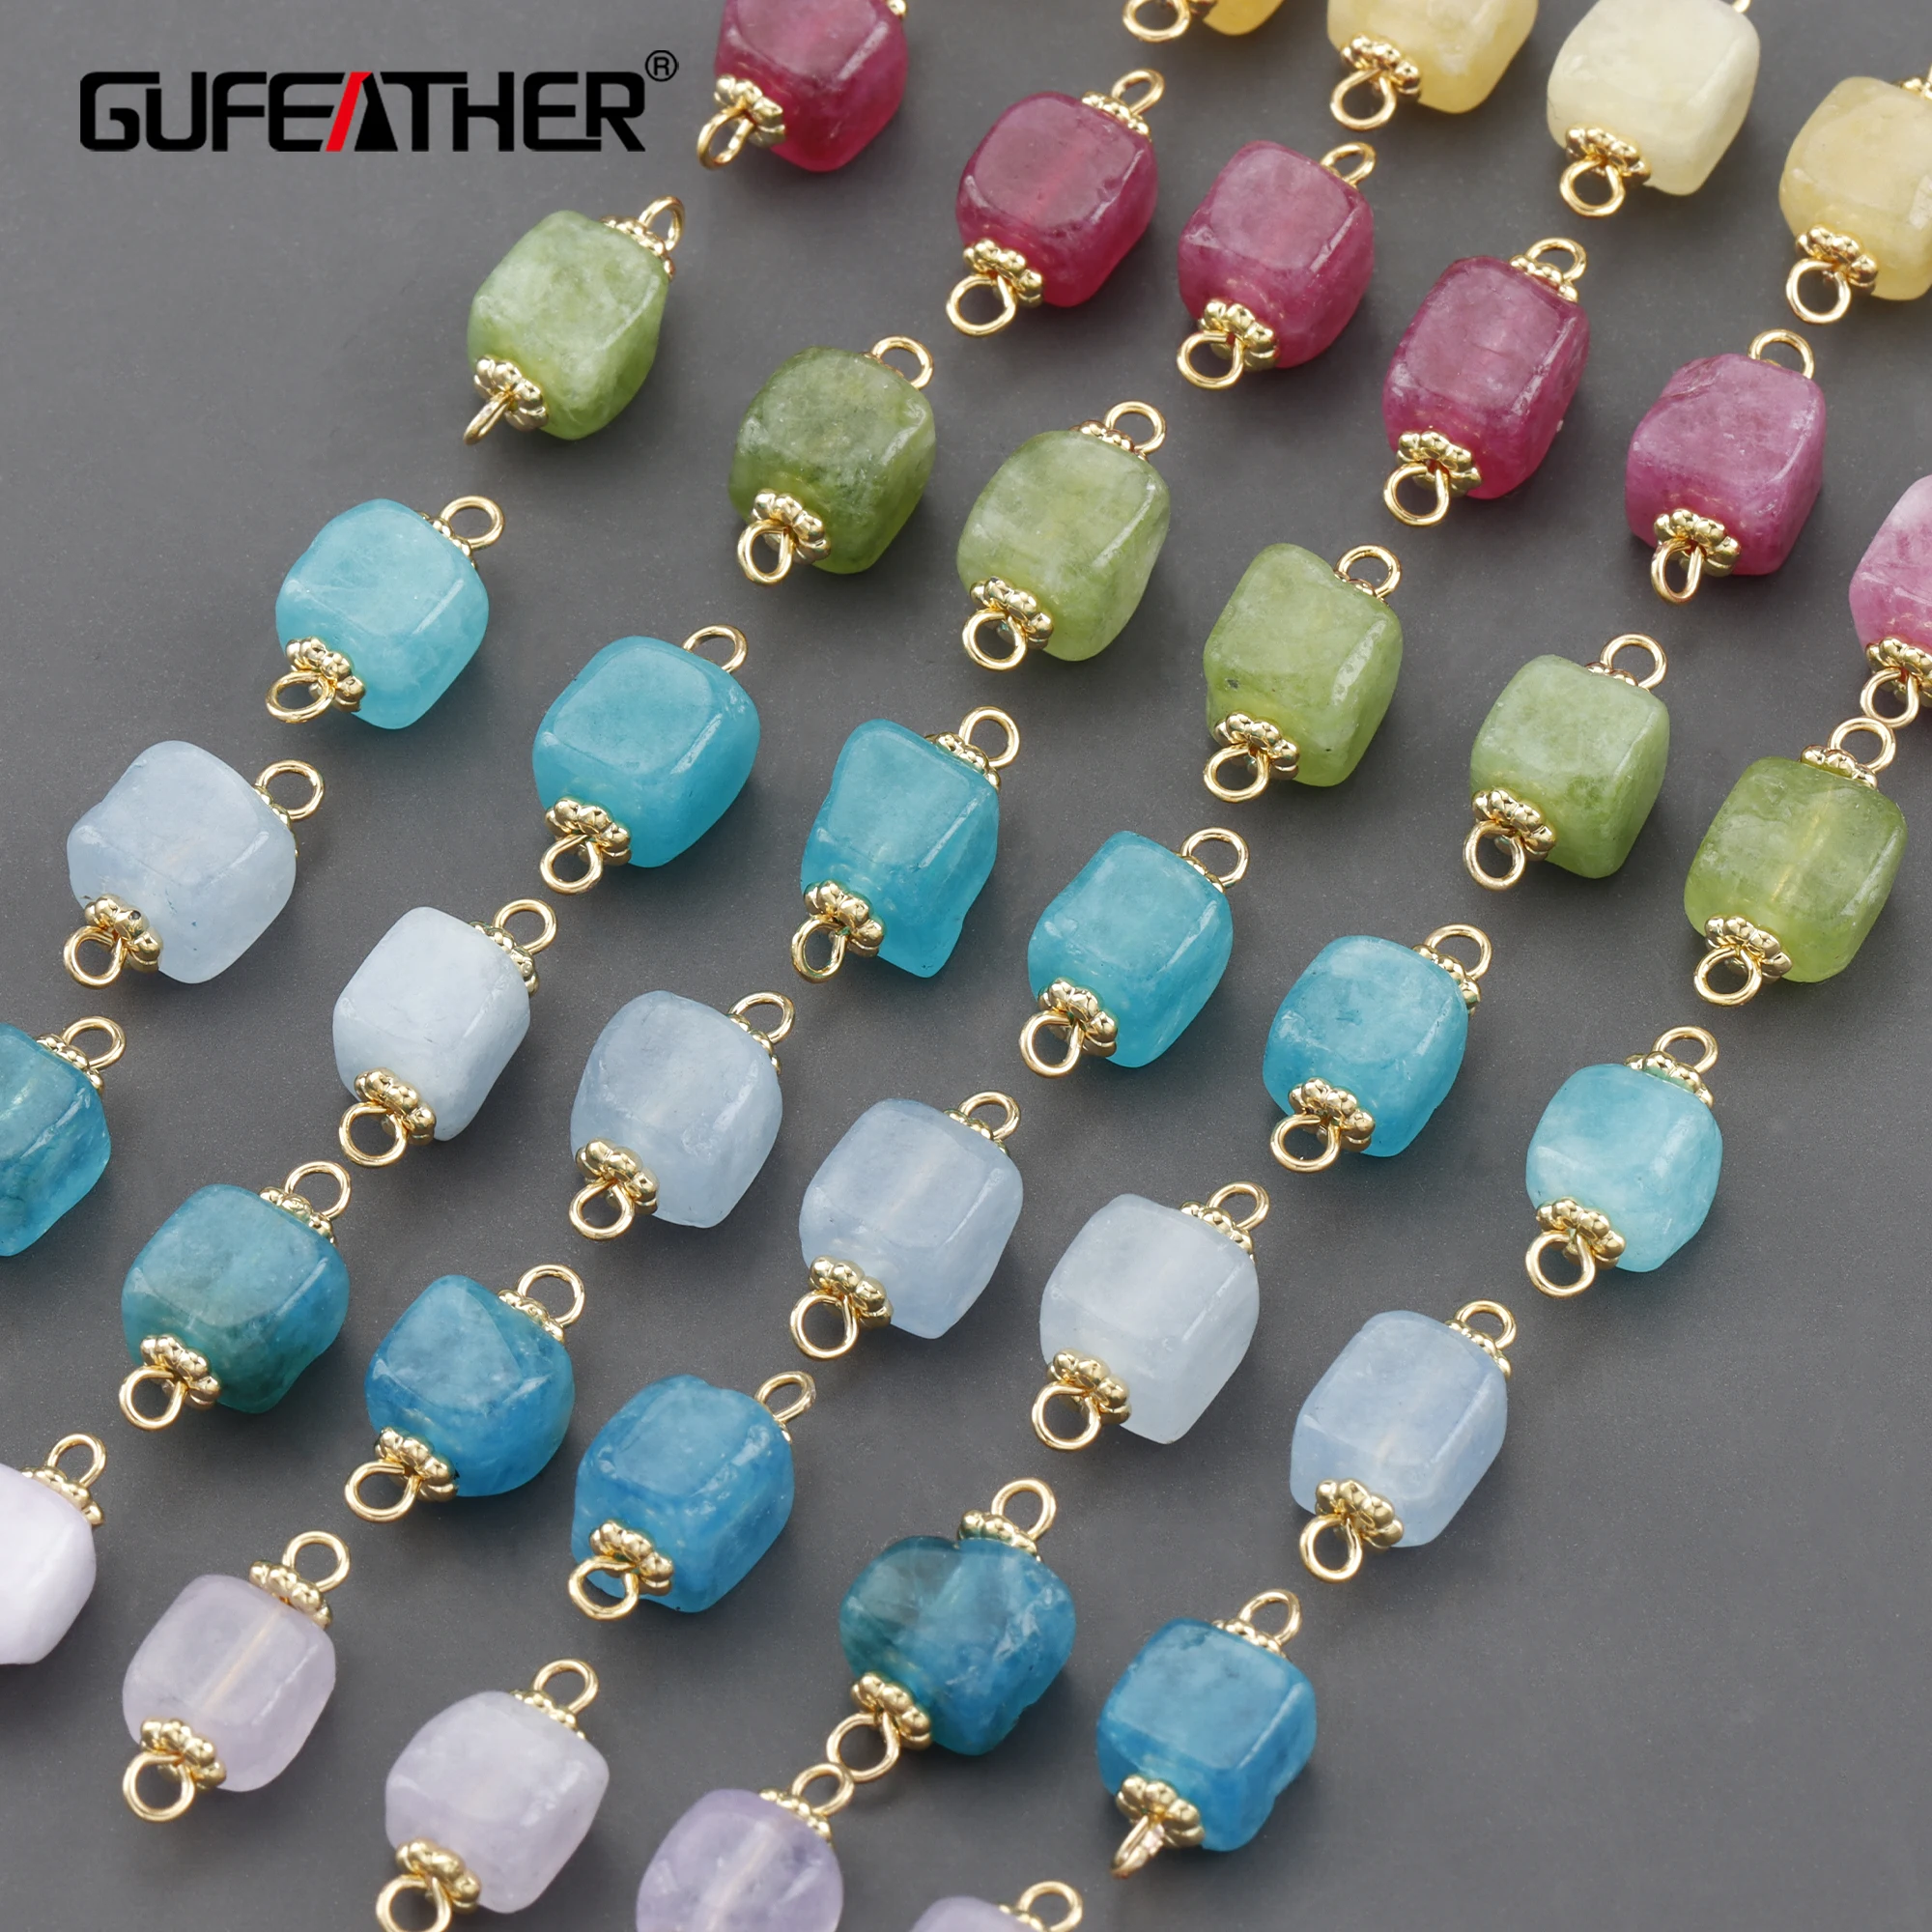 

GUFEATHER MA38,jewelry accessories,nickel free,18k gold plated,natural stone,jewelry making,diy bracelet necklace,10pcs/lot